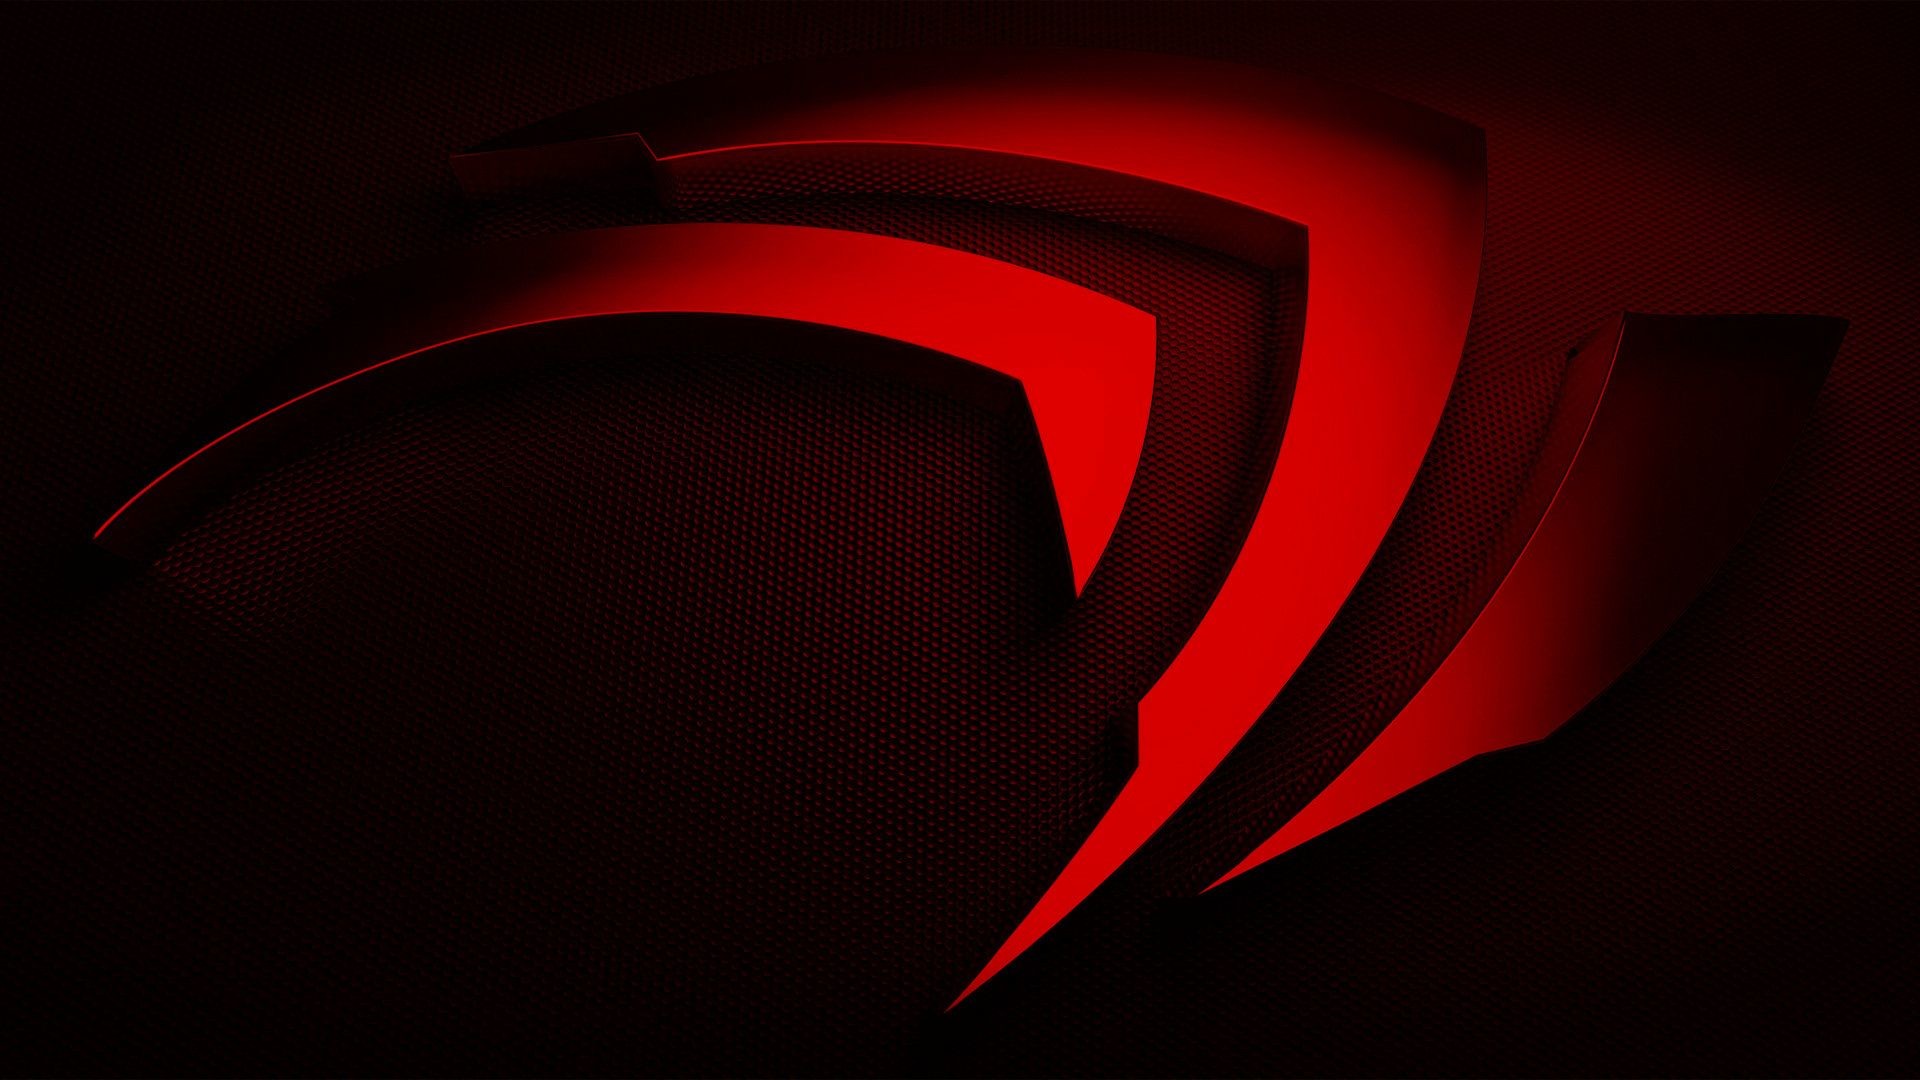 1920x1080 Fantastic 150 Cool Red Gaming 4k Wallpapers With Resolution 1920 x 1920 |  Best Cool Wallpapers